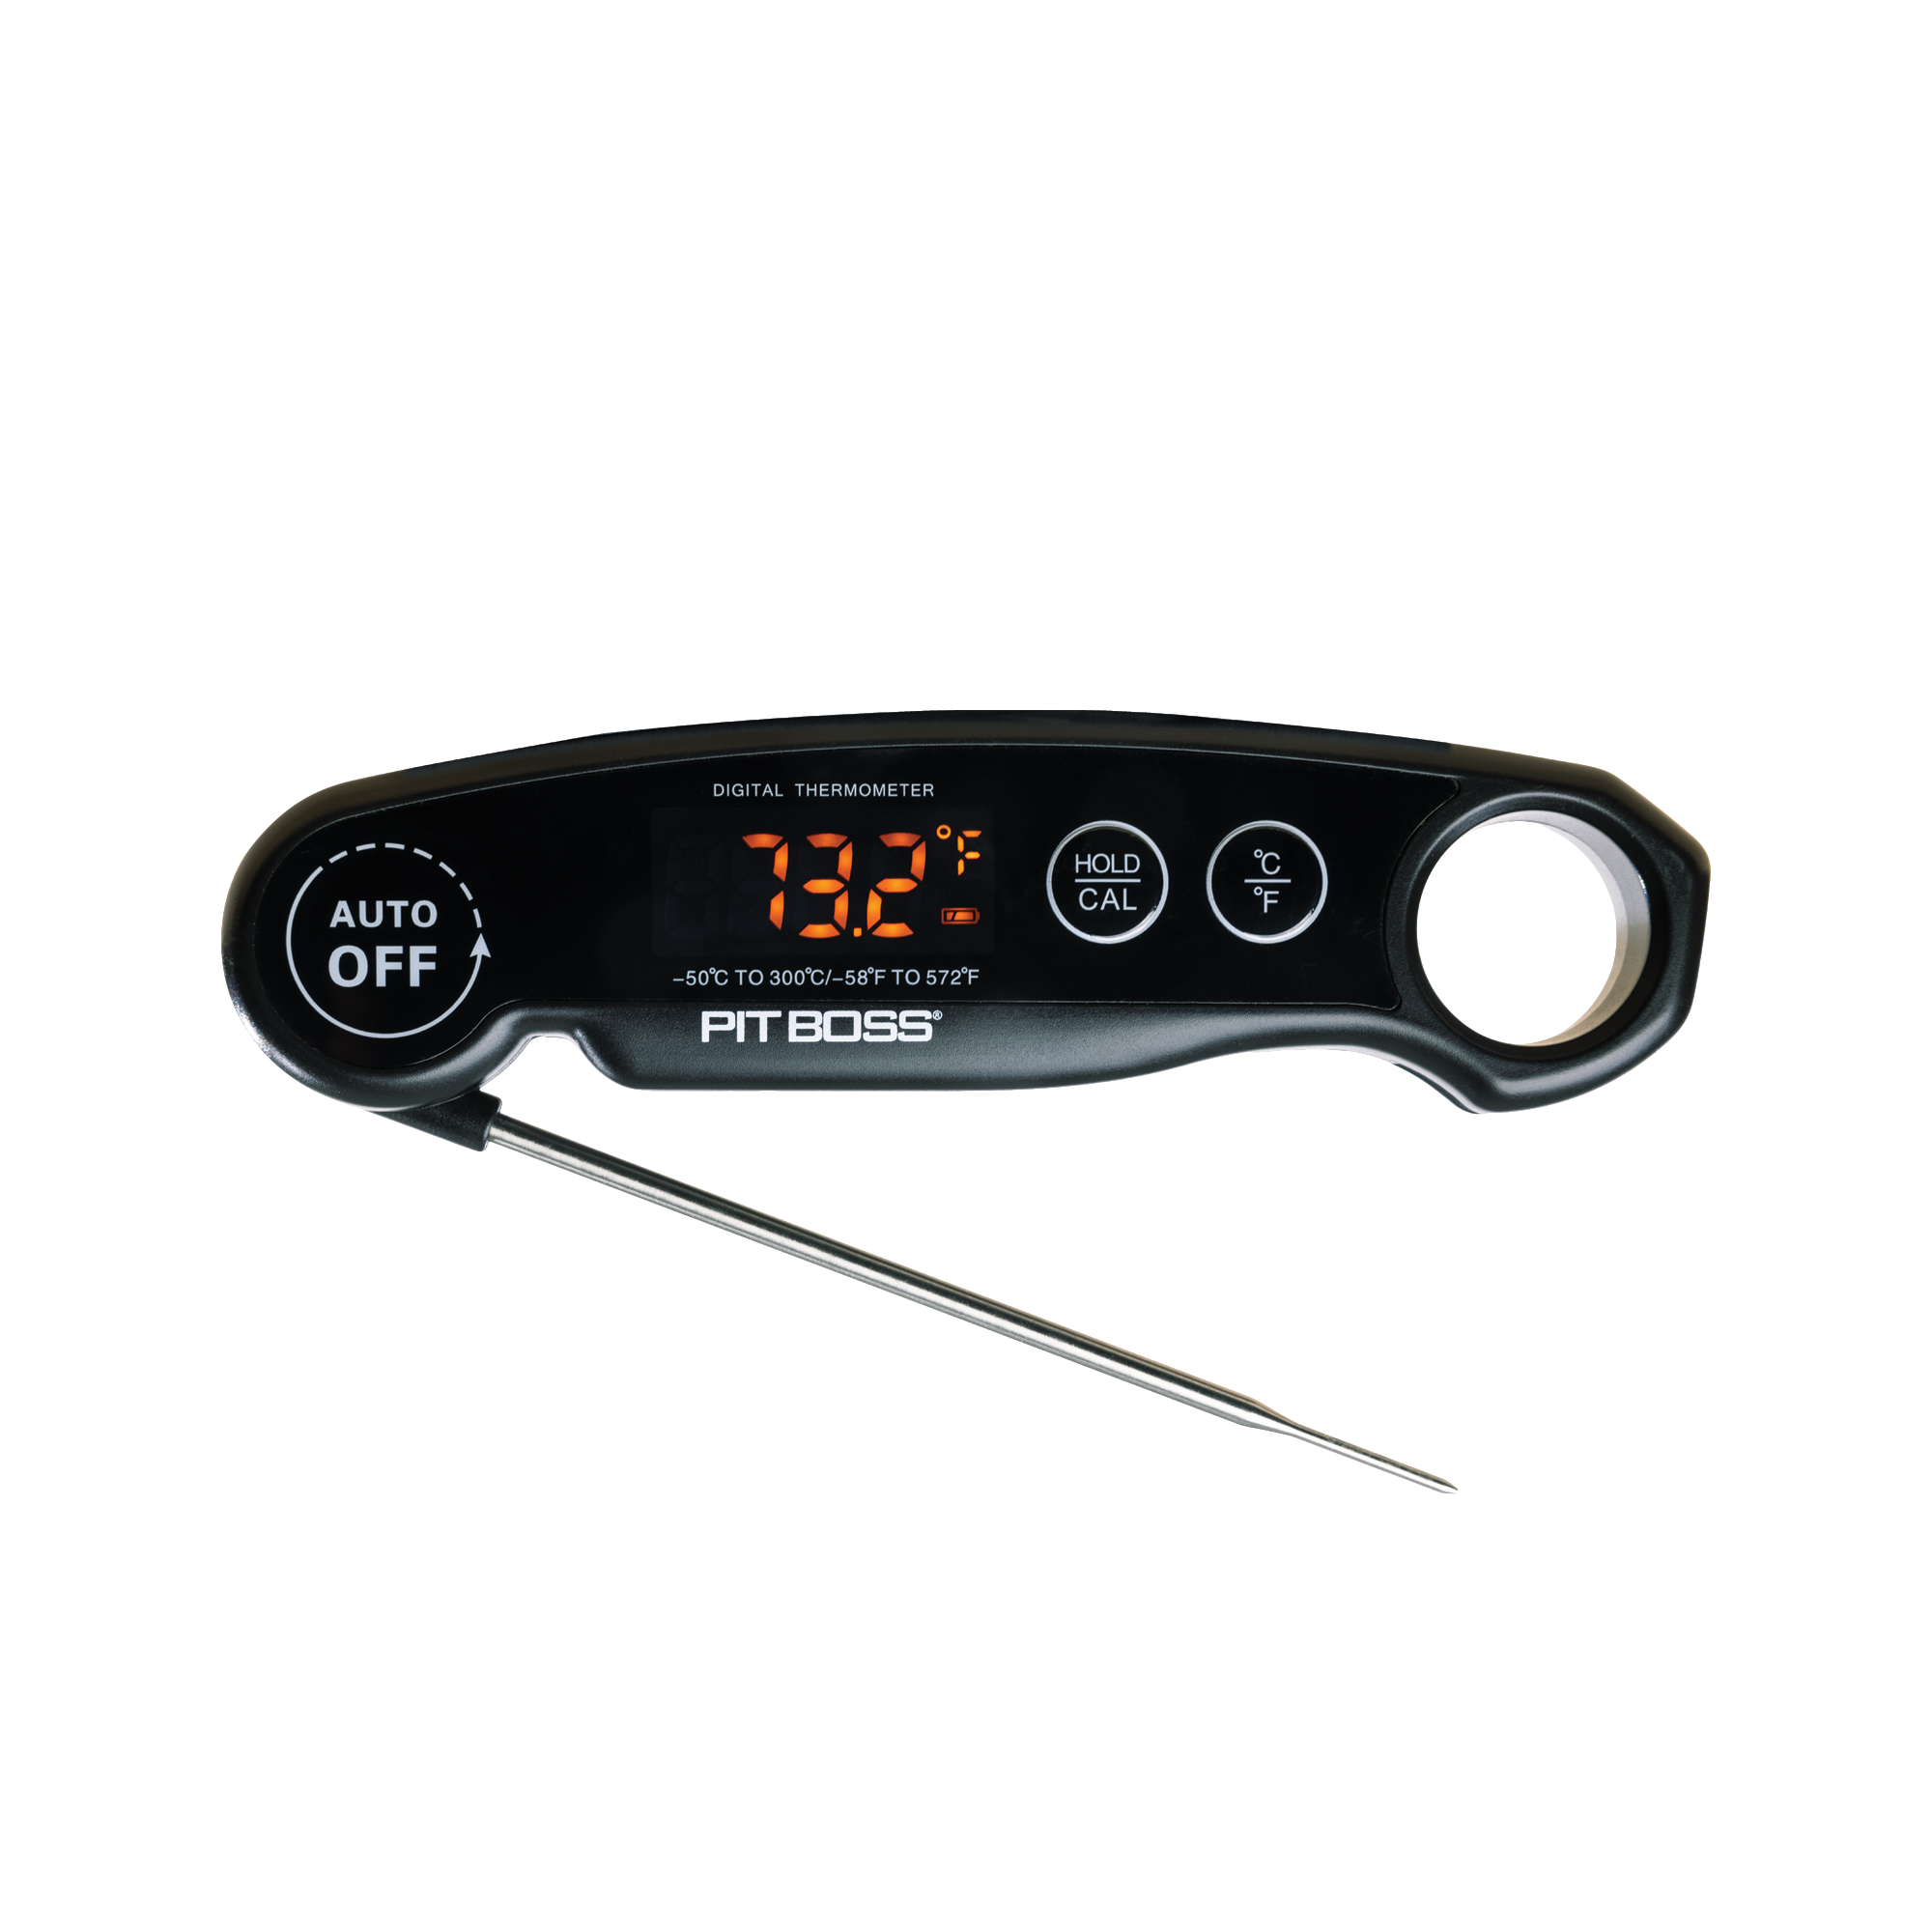 KENMORE Instant Read Digital Grill Thermometer with Cover PA-20537